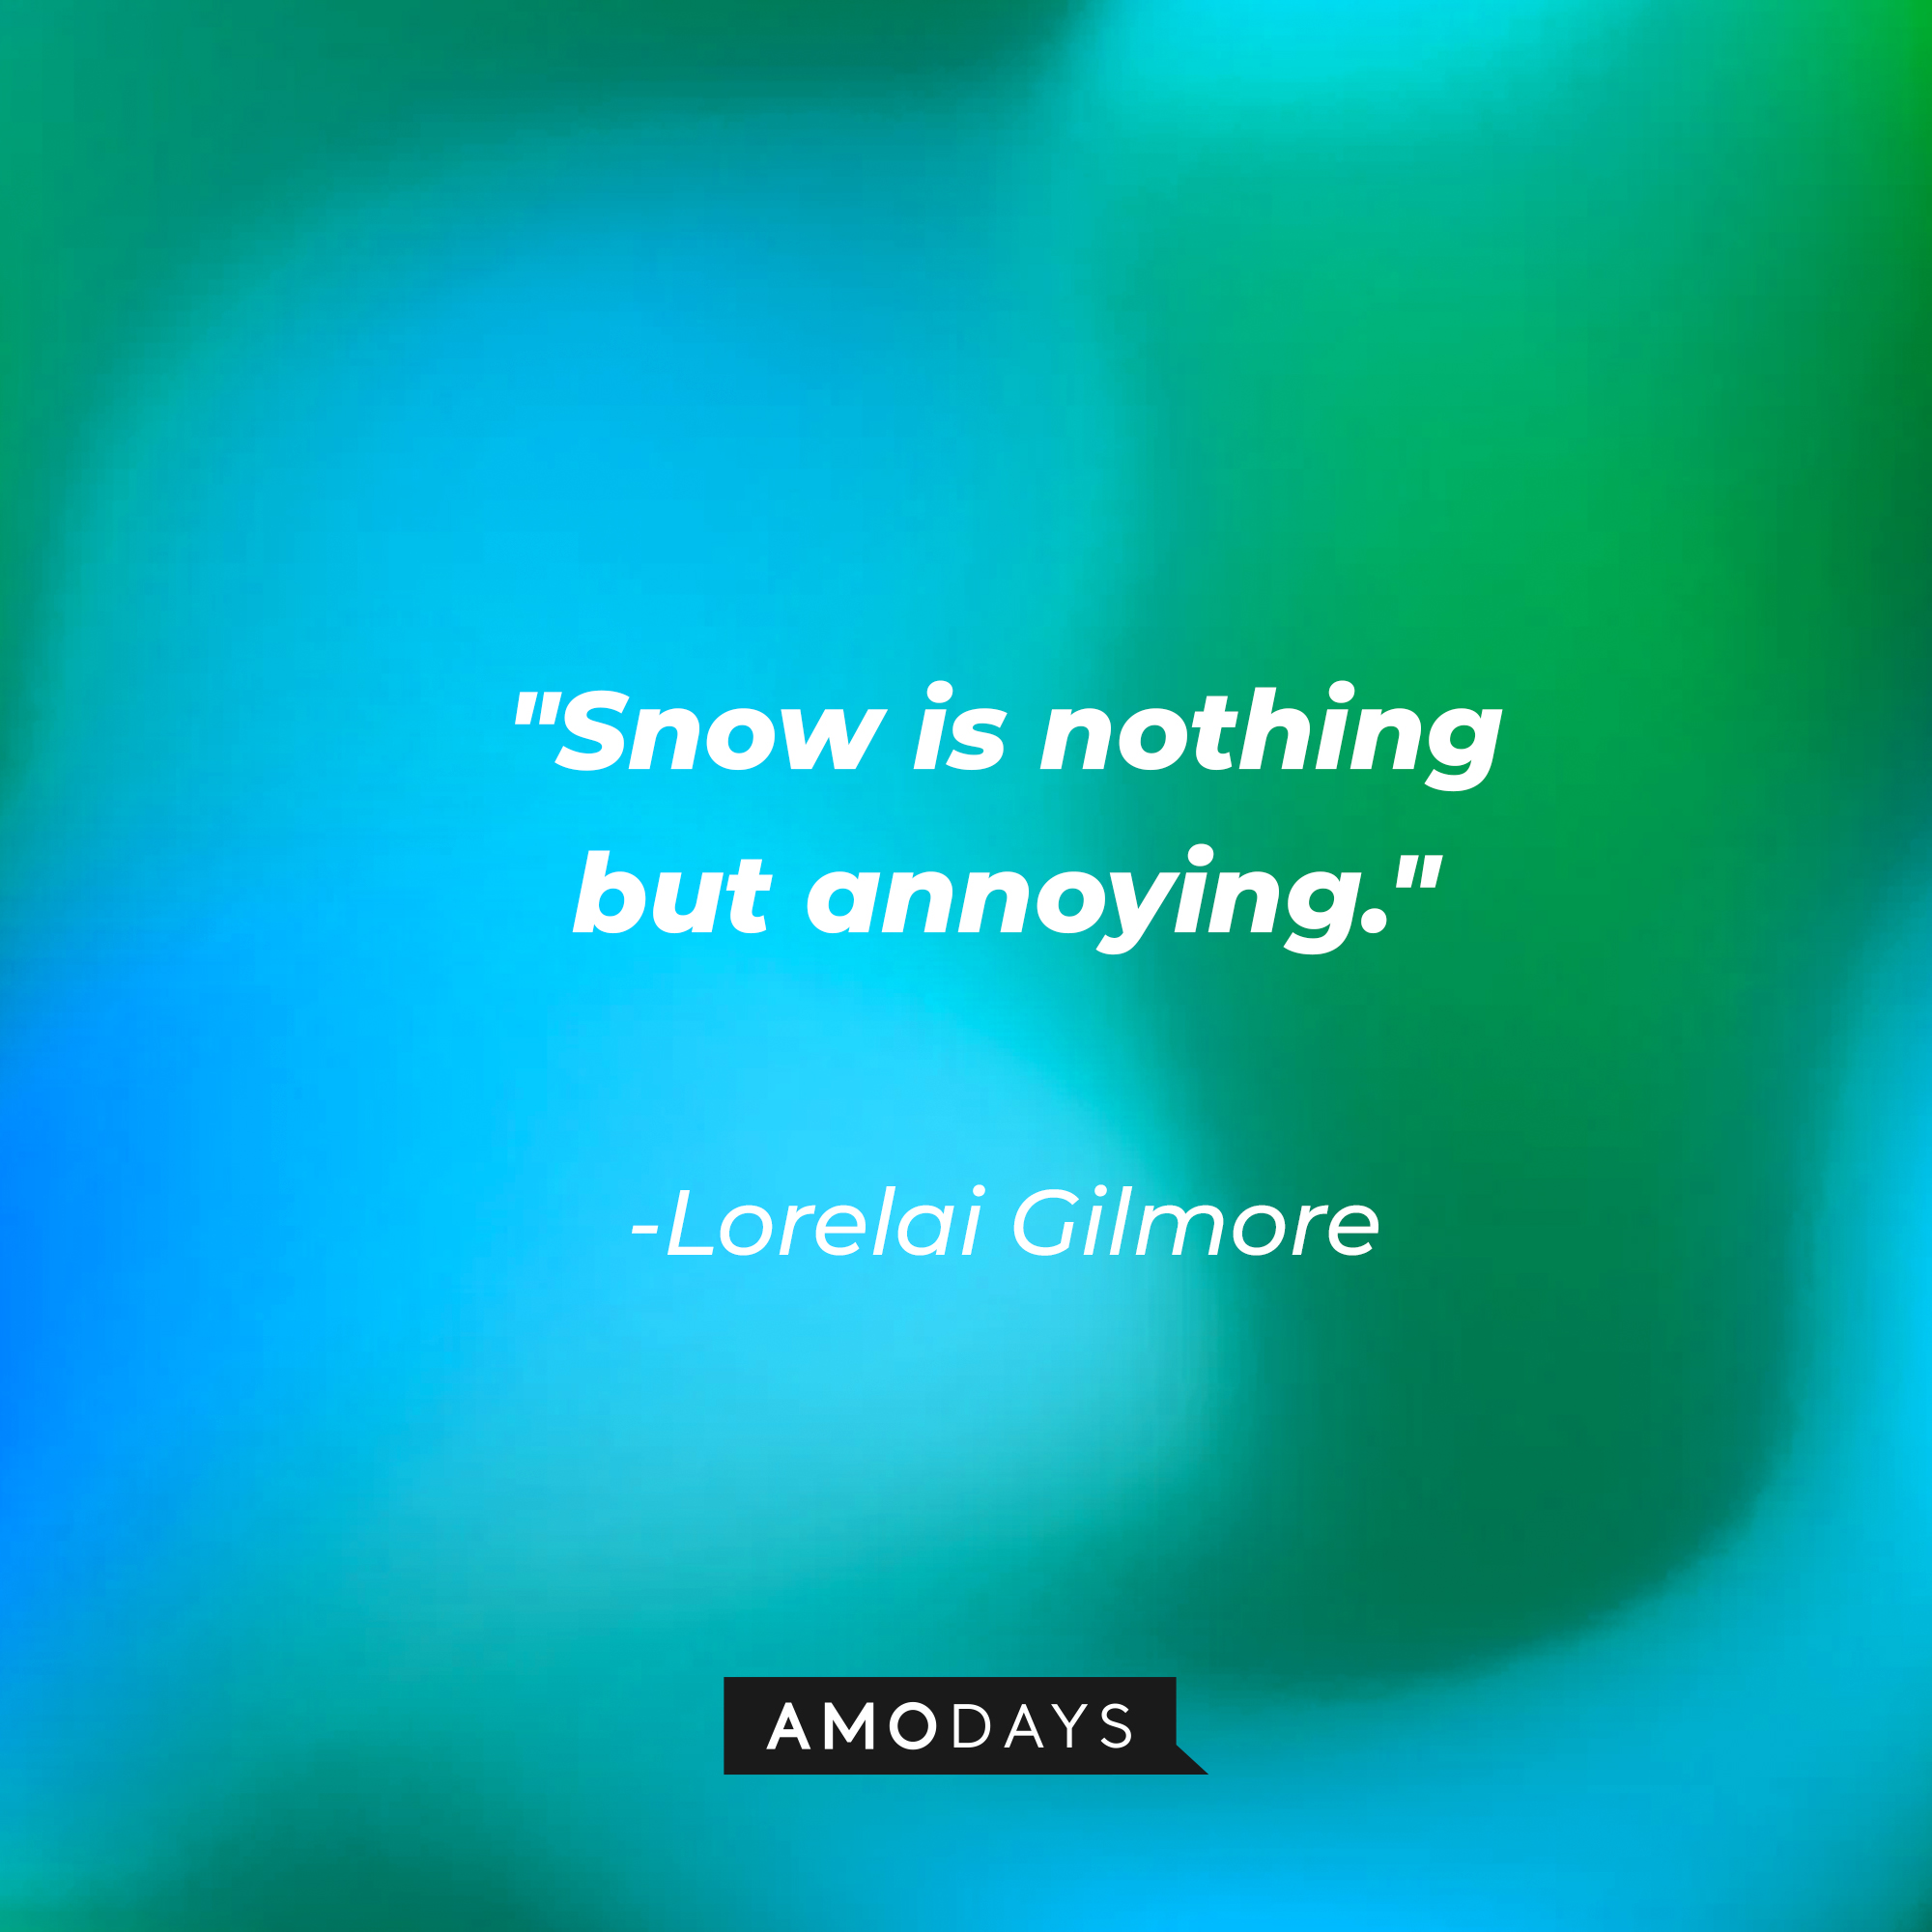 Lorelai Gilmore's quote: "Snow is nothing but annoying." | Source: AmoDays